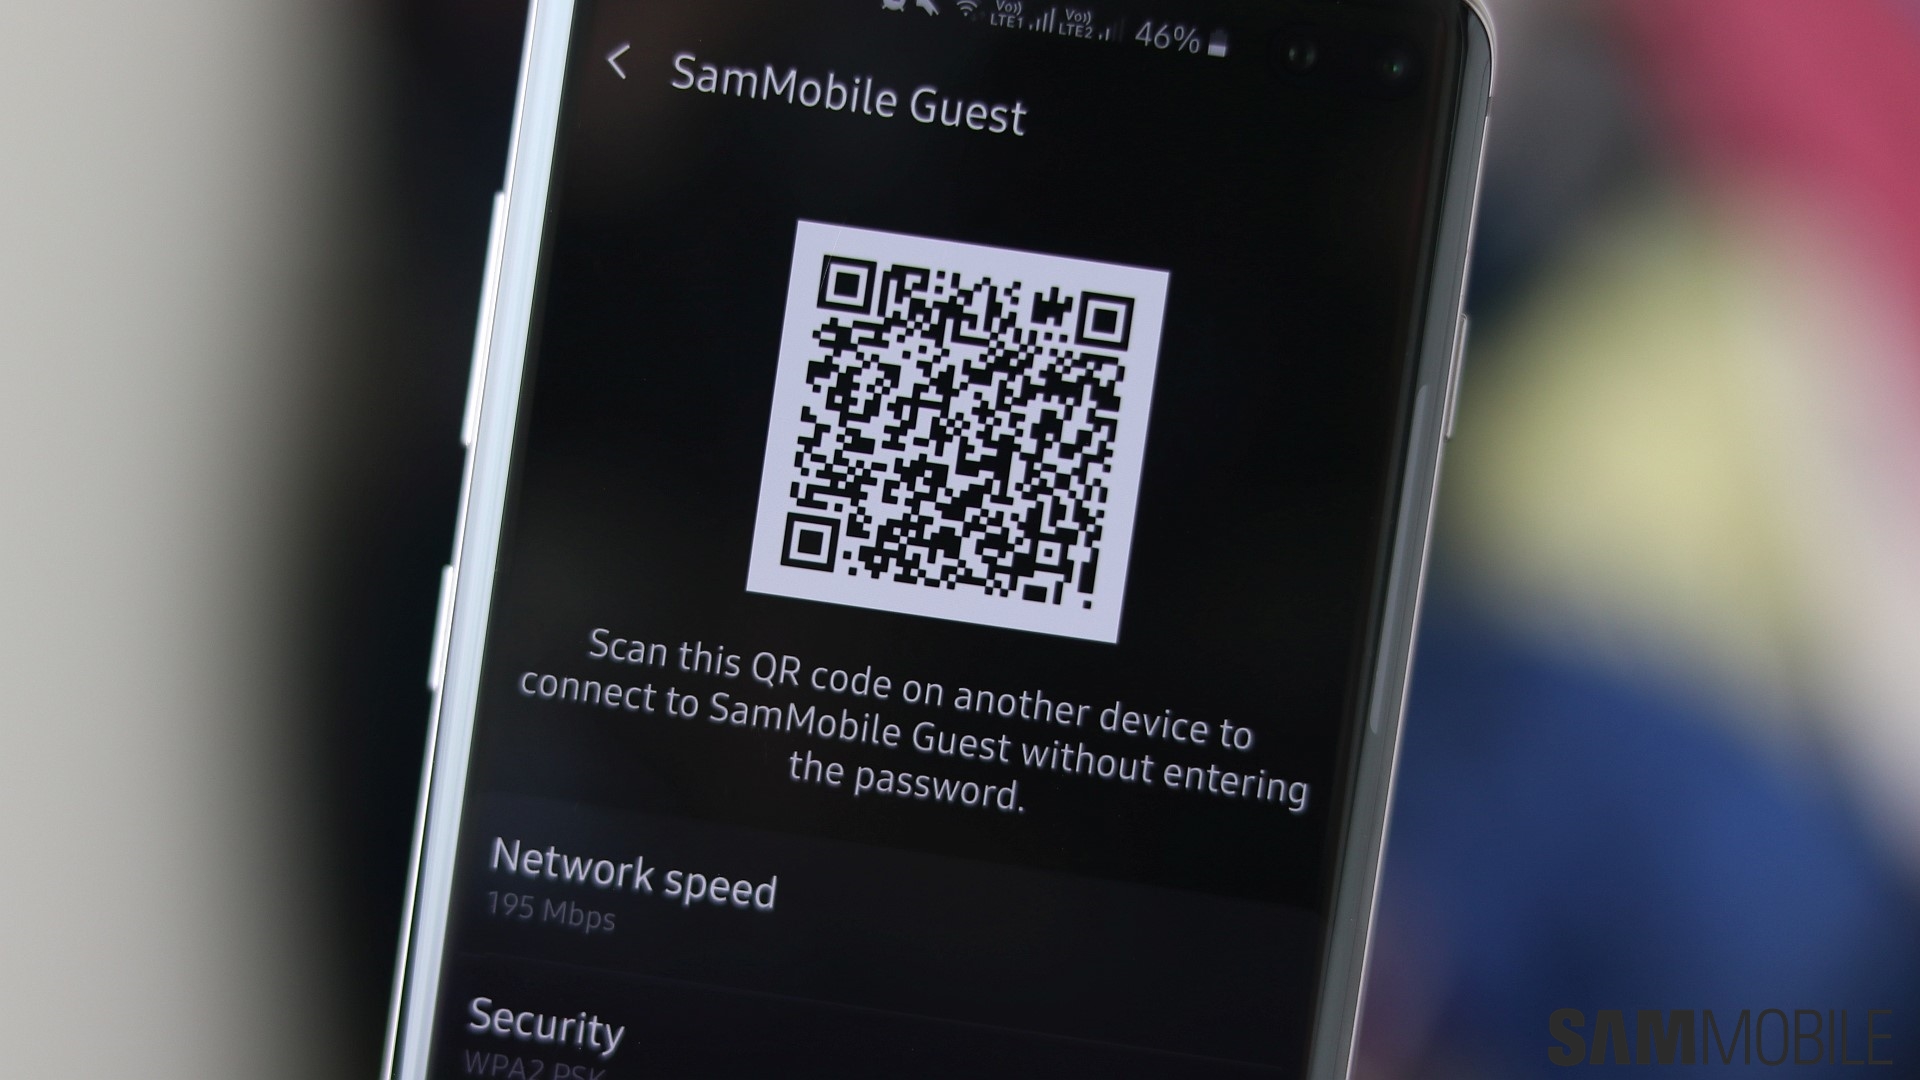 qr code reader android built in